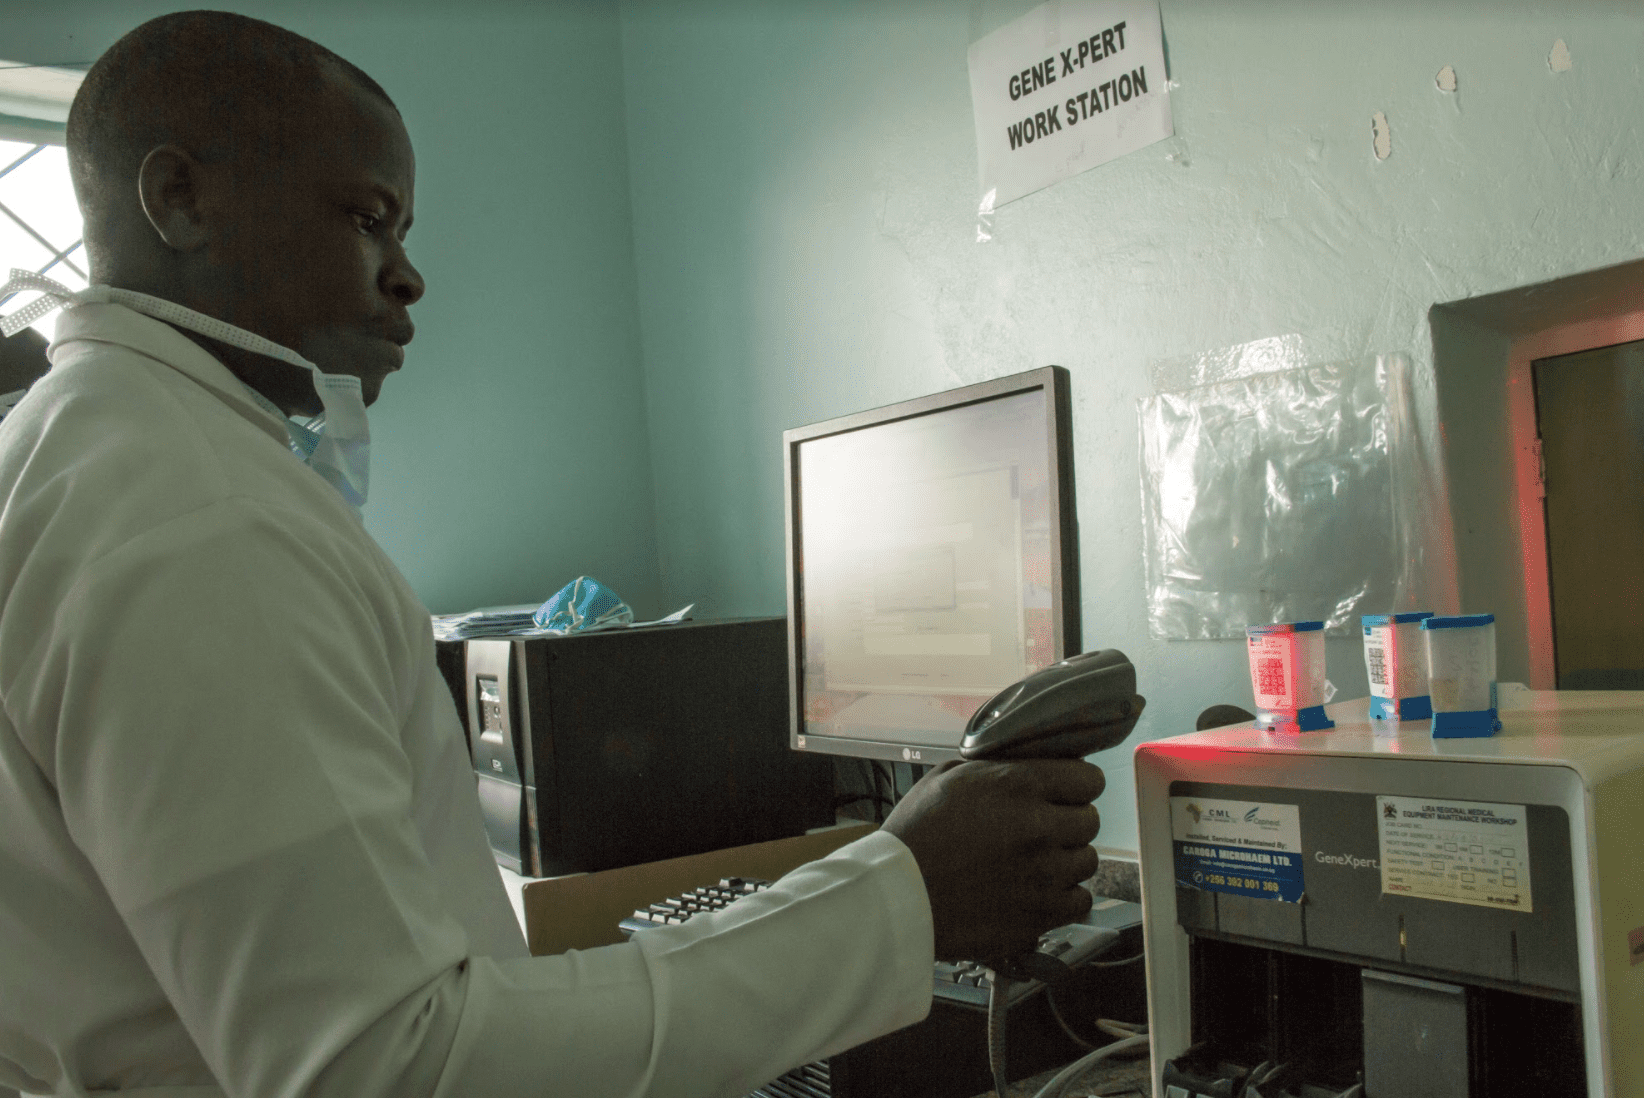 JSI has worked globally to strengthen tuberculosis (TB) service delivery and management systems in high-prevalence settings.